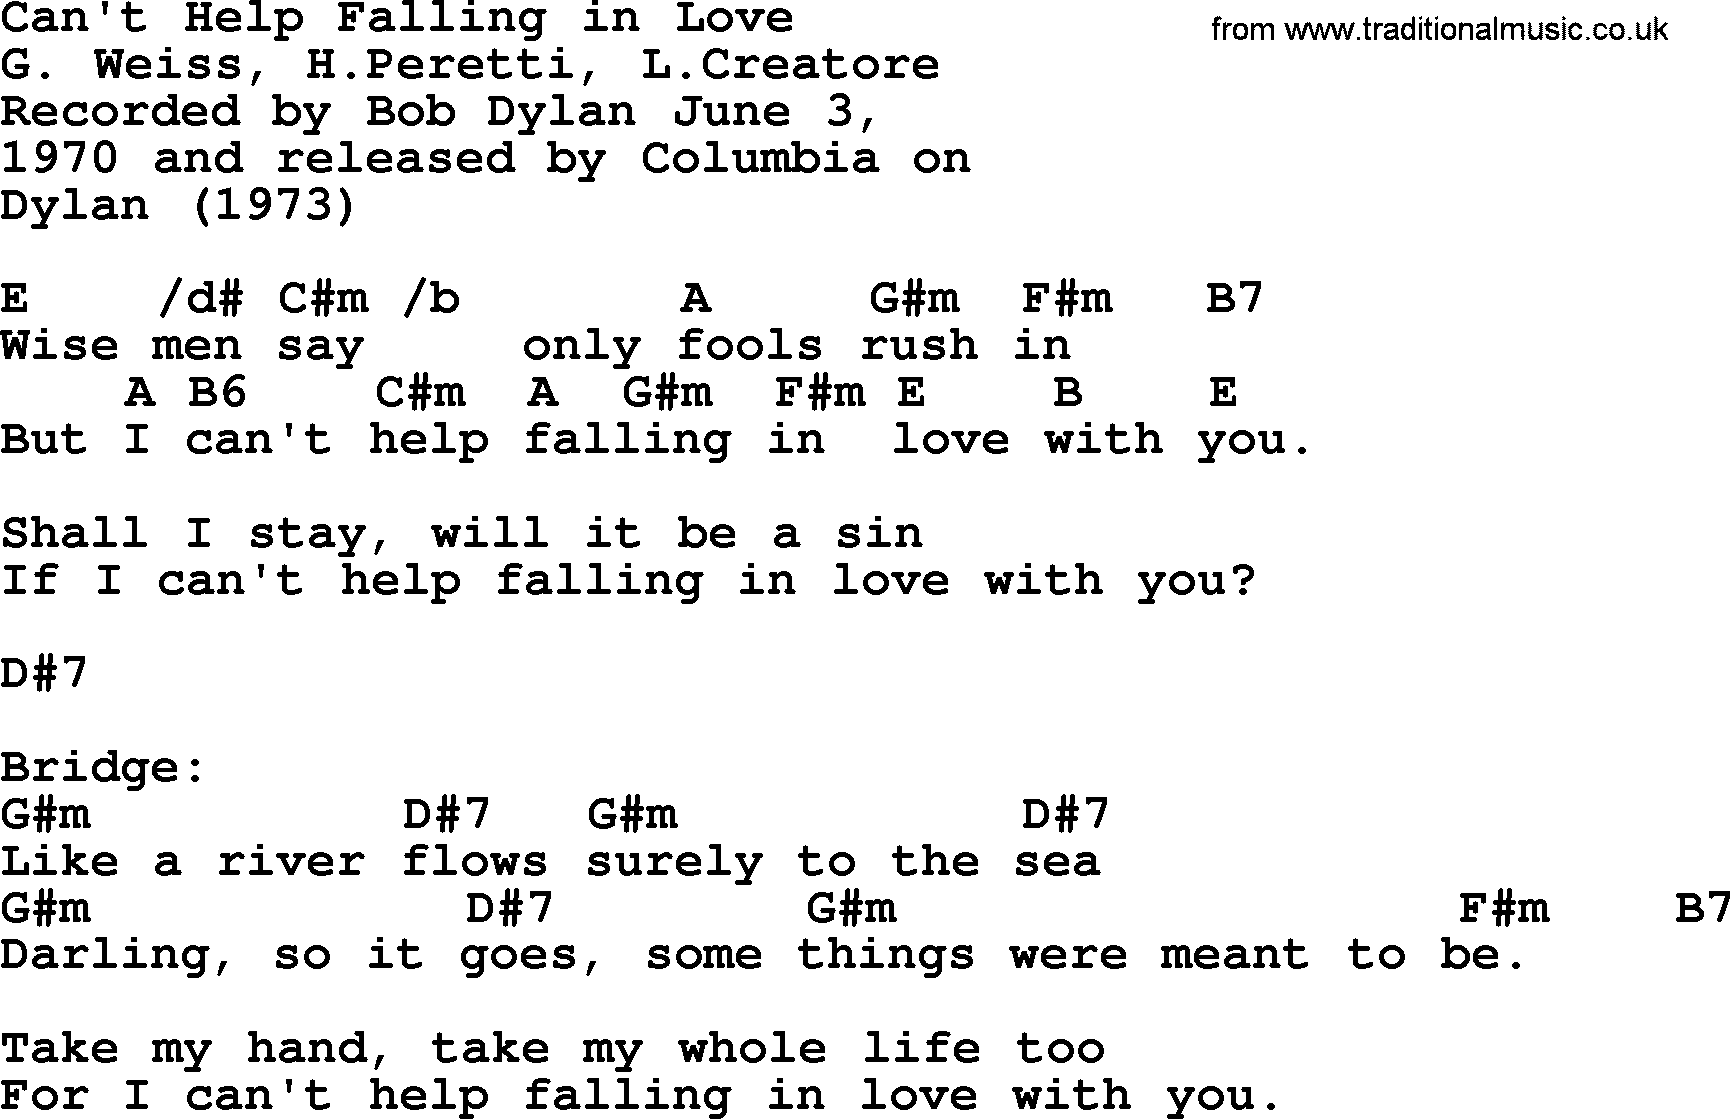 Bob Dylan song, lyrics with chords - Can't Help Falling in Love